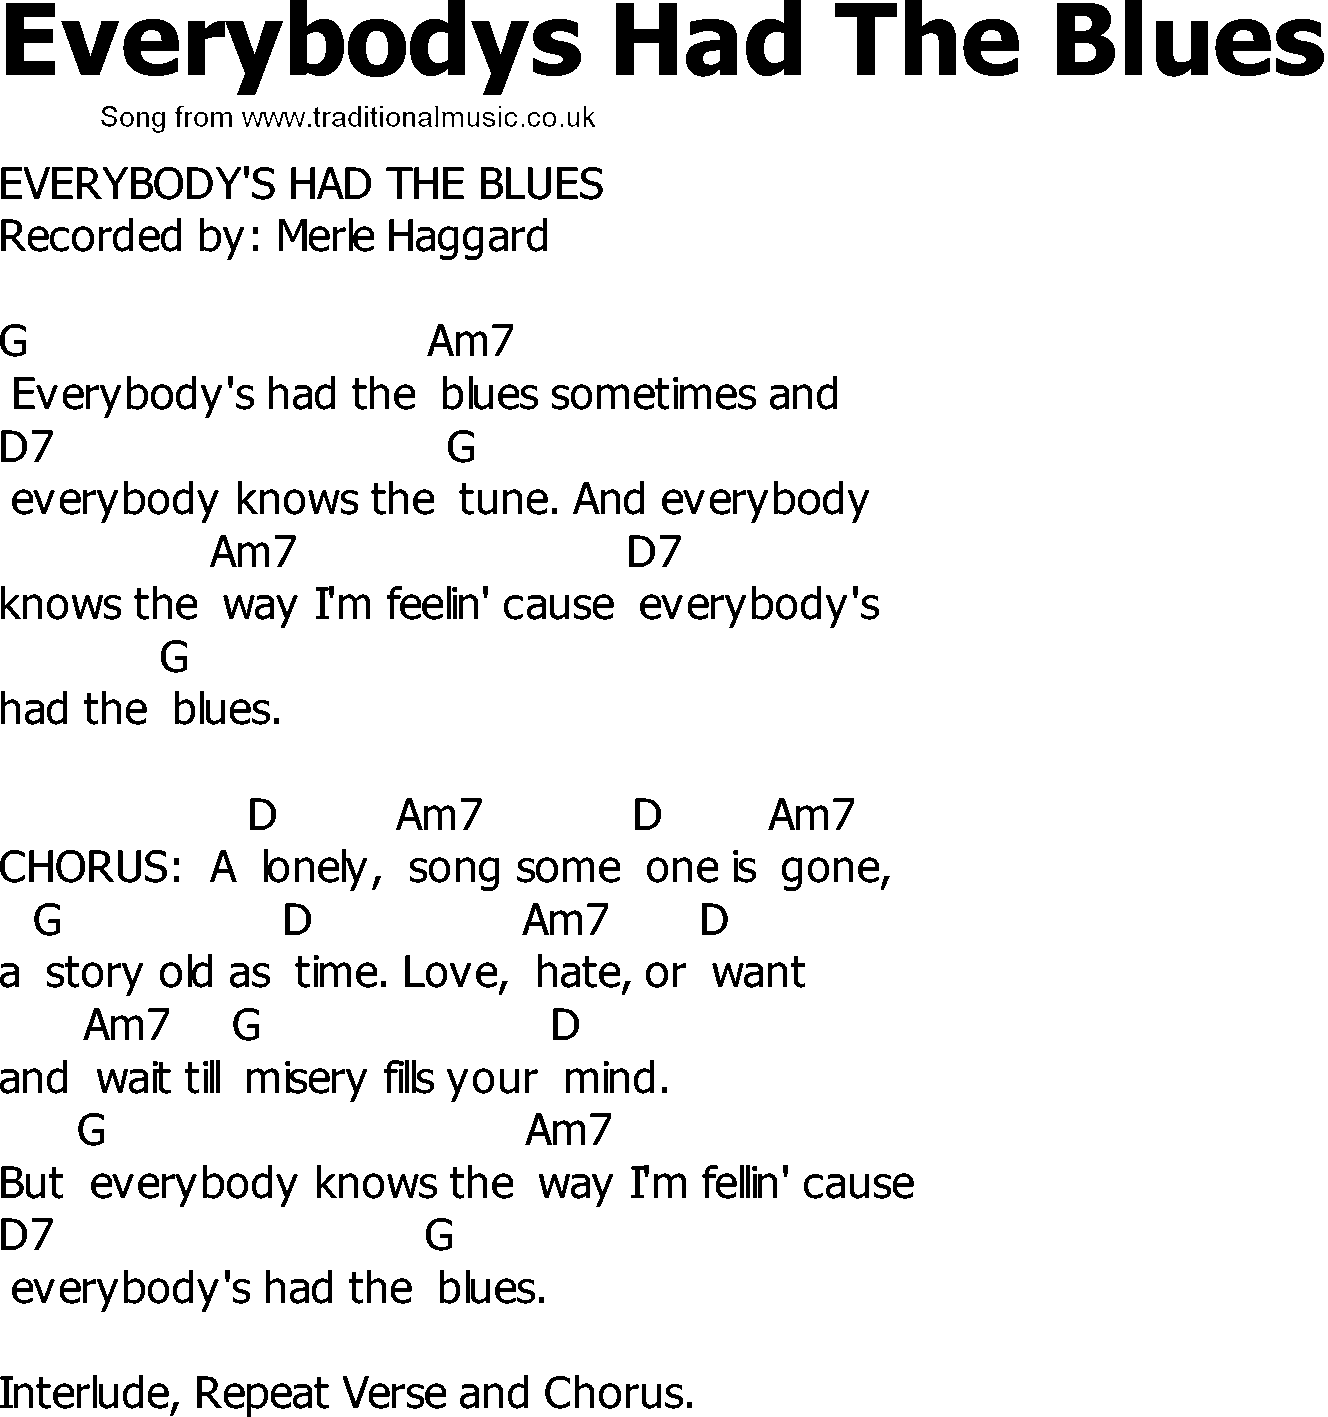 Old Country song lyrics with chords - Everybodys Had The Blues